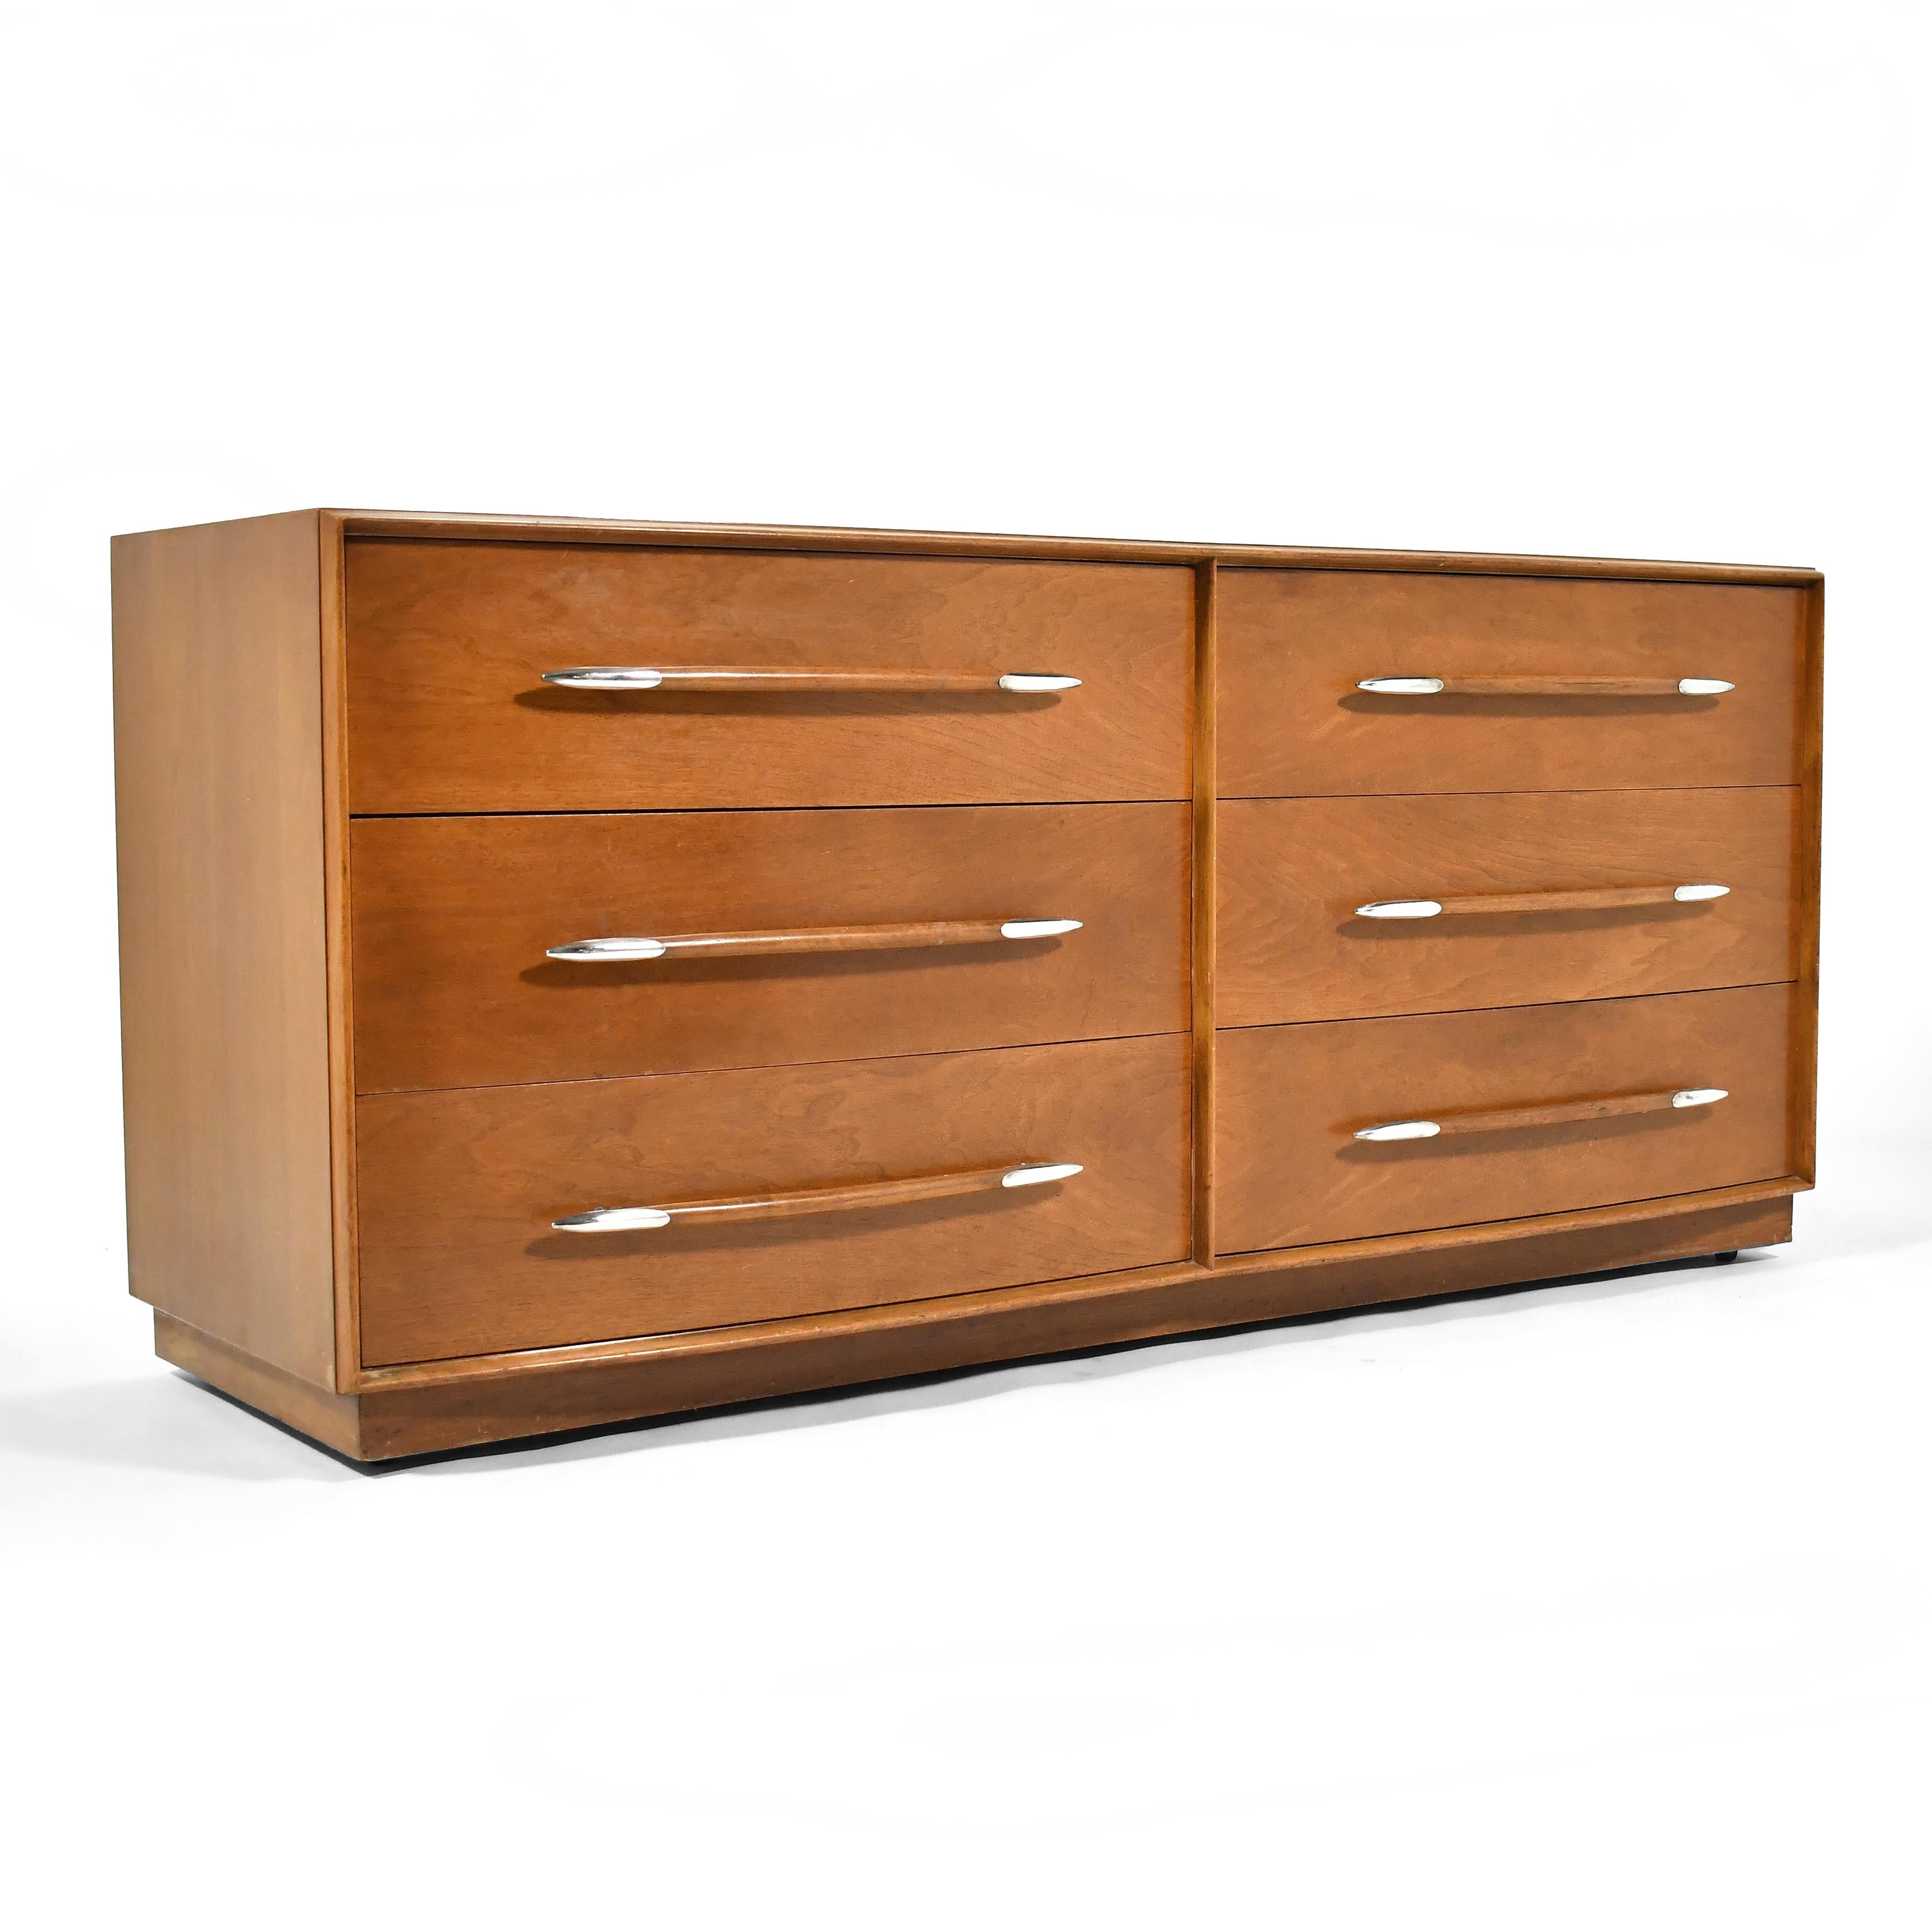 This stunning double dresser by T.H. Robsjohn-Gibbings for Widdicomb is impeccably designed and expertly crafted. The walnut case has is exquisitely detailed with the curved front and elegant spear-shaped silver pulls.

30